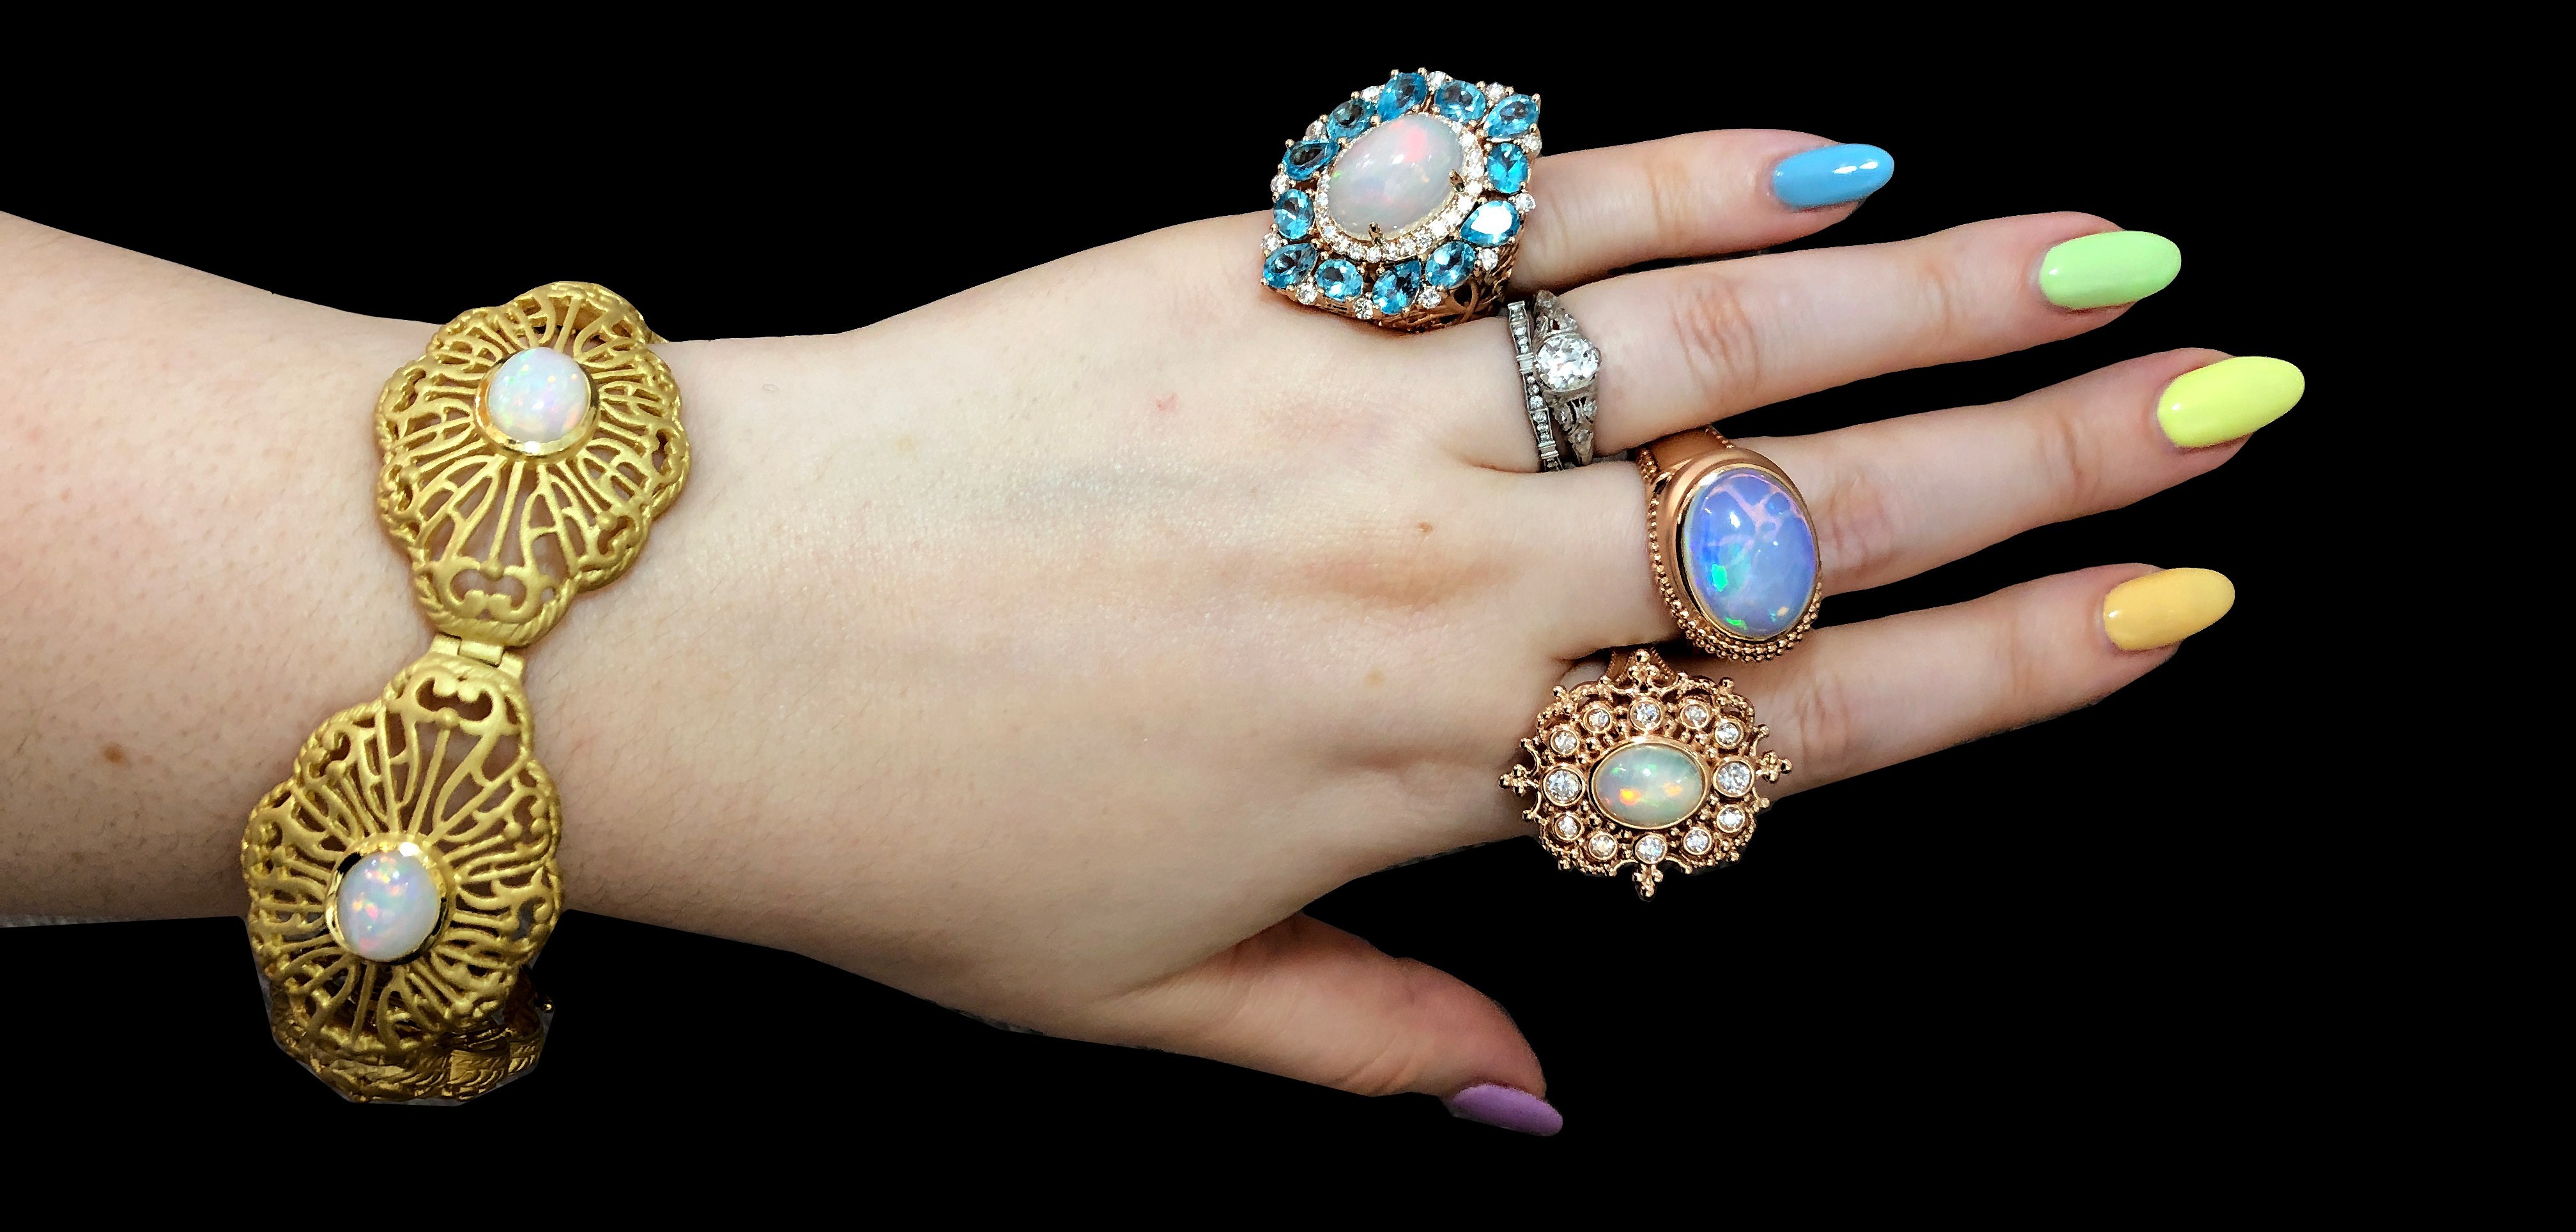 Beautiful colored gemstone jewels by Dallas Prince Designs!